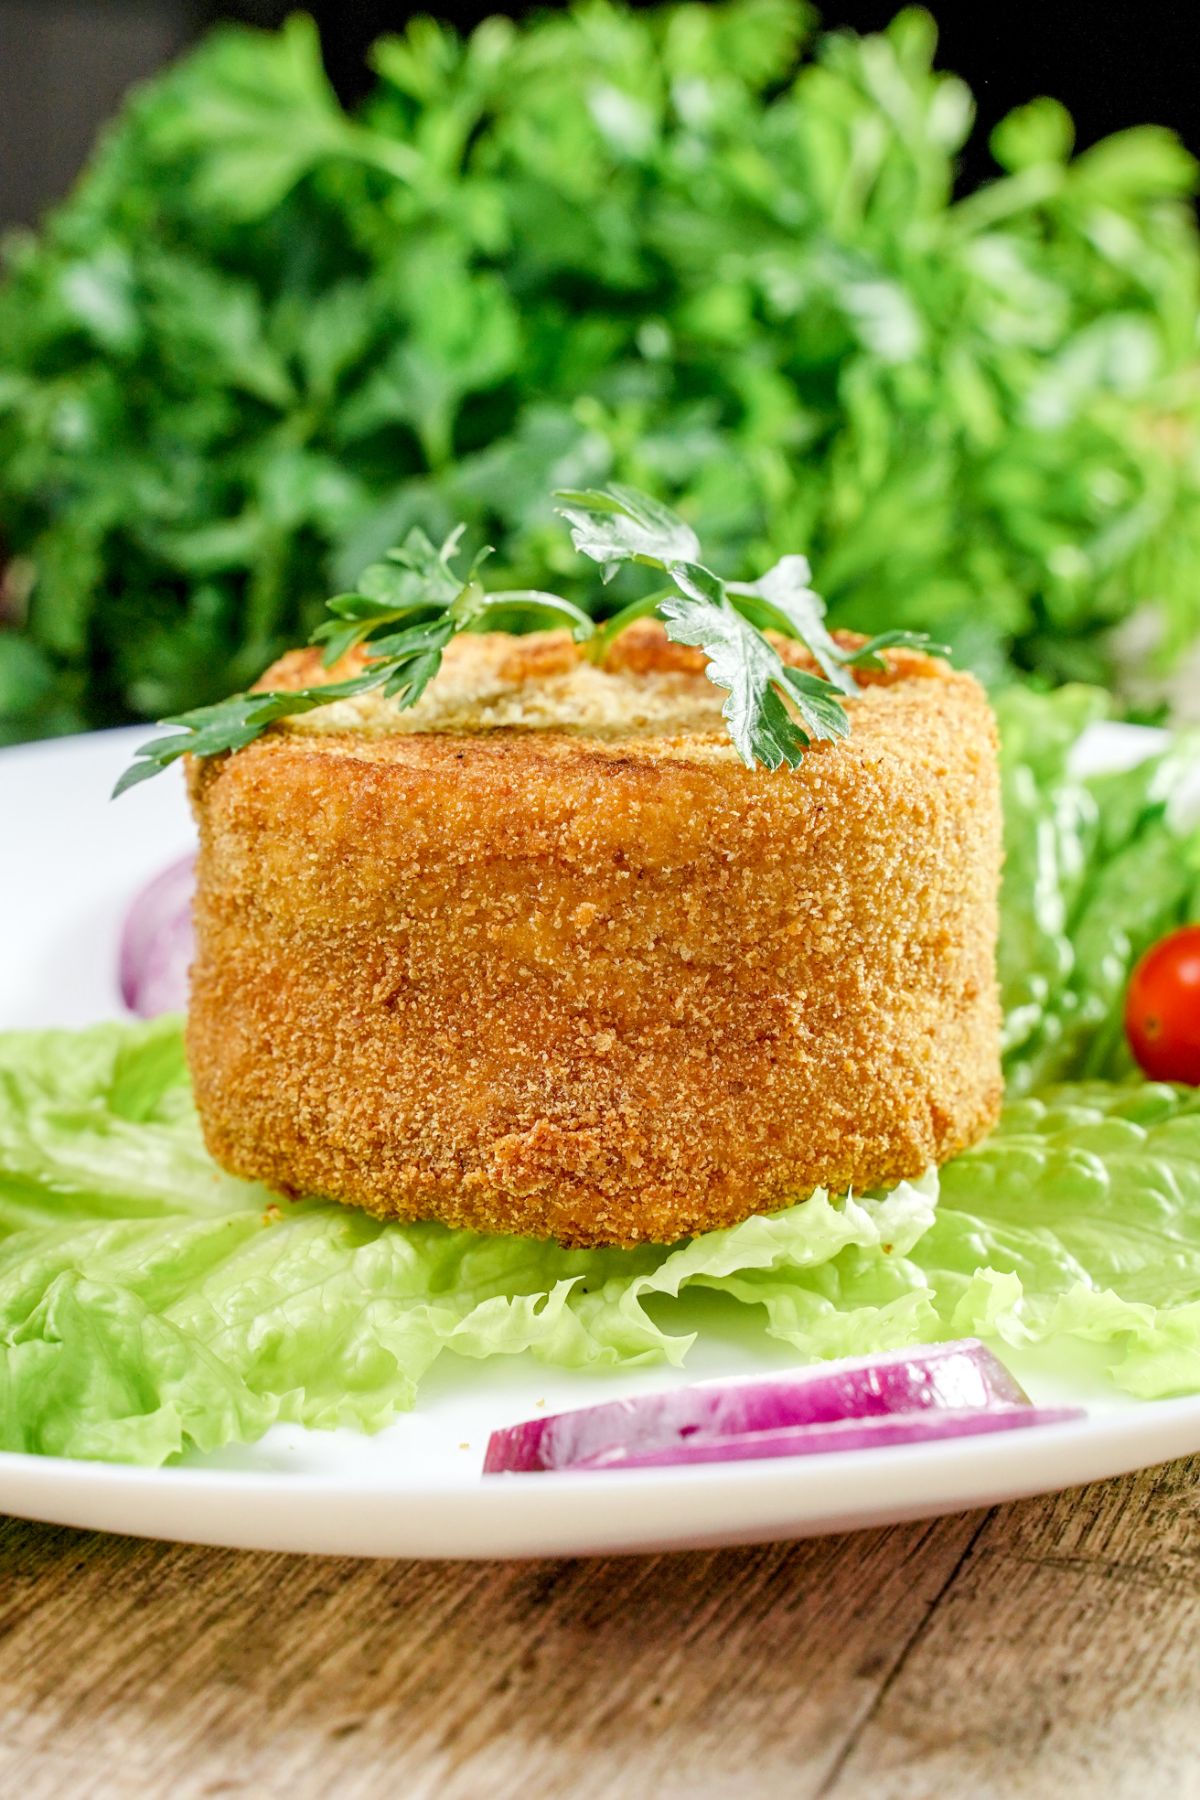 fried ham and cheese cutlet on plate with lettuce leave and red onoiin